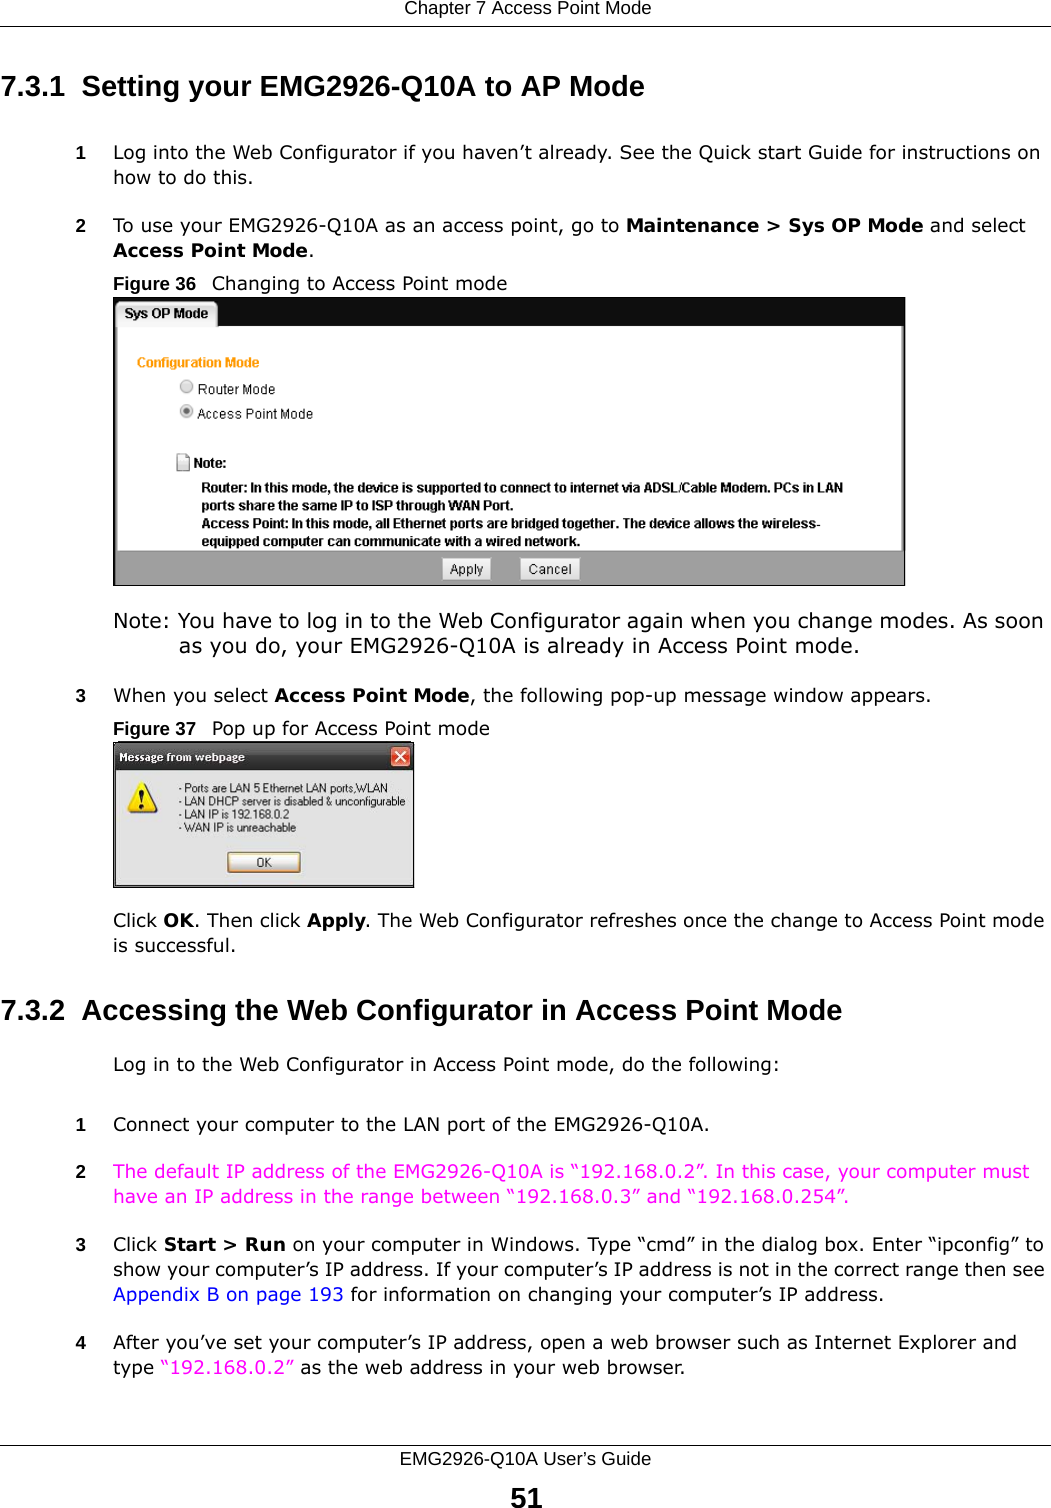  Chapter 7 Access Point ModeEMG2926-Q10A User’s Guide517.3.1  Setting your EMG2926-Q10A to AP Mode1Log into the Web Configurator if you haven’t already. See the Quick start Guide for instructions on how to do this.2To use your EMG2926-Q10A as an access point, go to Maintenance &gt; Sys OP Mode and select Access Point Mode. Figure 36   Changing to Access Point modeNote: You have to log in to the Web Configurator again when you change modes. As soon as you do, your EMG2926-Q10A is already in Access Point mode.3When you select Access Point Mode, the following pop-up message window appears.Figure 37   Pop up for Access Point mode Click OK. Then click Apply. The Web Configurator refreshes once the change to Access Point mode is successful.7.3.2  Accessing the Web Configurator in Access Point ModeLog in to the Web Configurator in Access Point mode, do the following:1Connect your computer to the LAN port of the EMG2926-Q10A. 2The default IP address of the EMG2926-Q10A is “192.168.0.2”. In this case, your computer must have an IP address in the range between “192.168.0.3” and “192.168.0.254”.3Click Start &gt; Run on your computer in Windows. Type “cmd” in the dialog box. Enter “ipconfig” to show your computer’s IP address. If your computer’s IP address is not in the correct range then see Appendix B on page 193 for information on changing your computer’s IP address.4After you’ve set your computer’s IP address, open a web browser such as Internet Explorer and type “192.168.0.2” as the web address in your web browser.